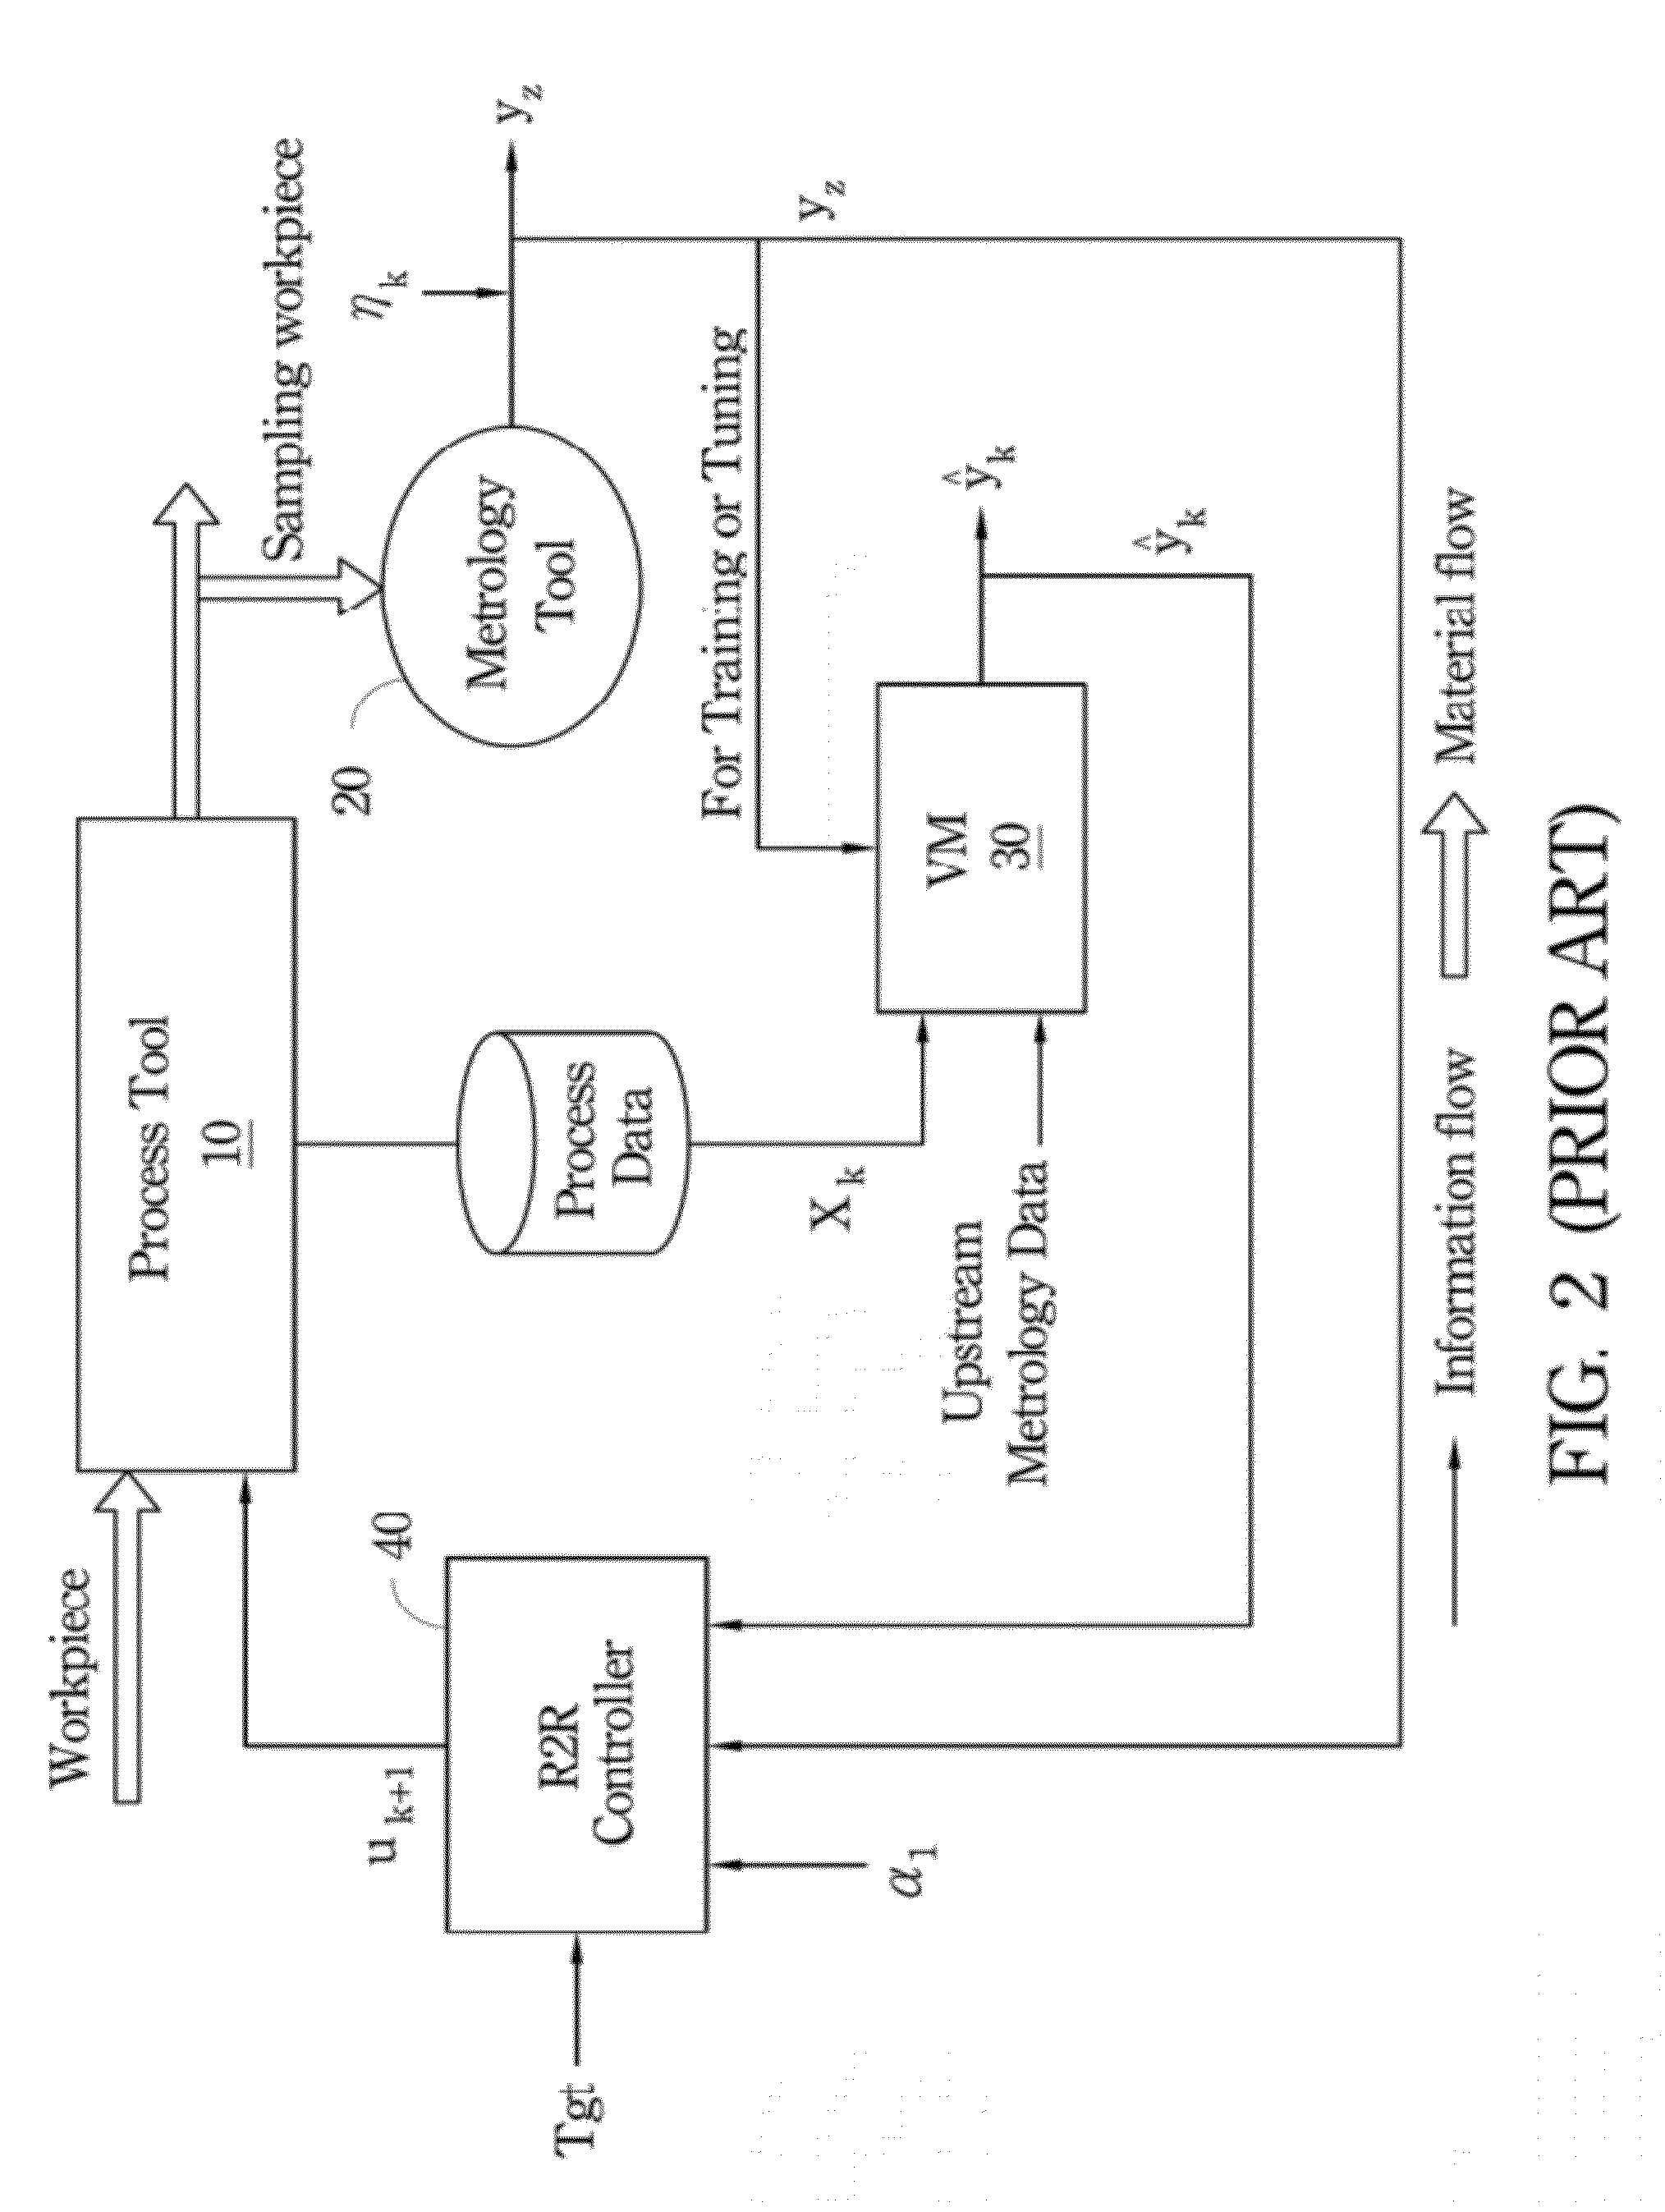 Advanced process control system and method utilizing virtual metrology with reliance index